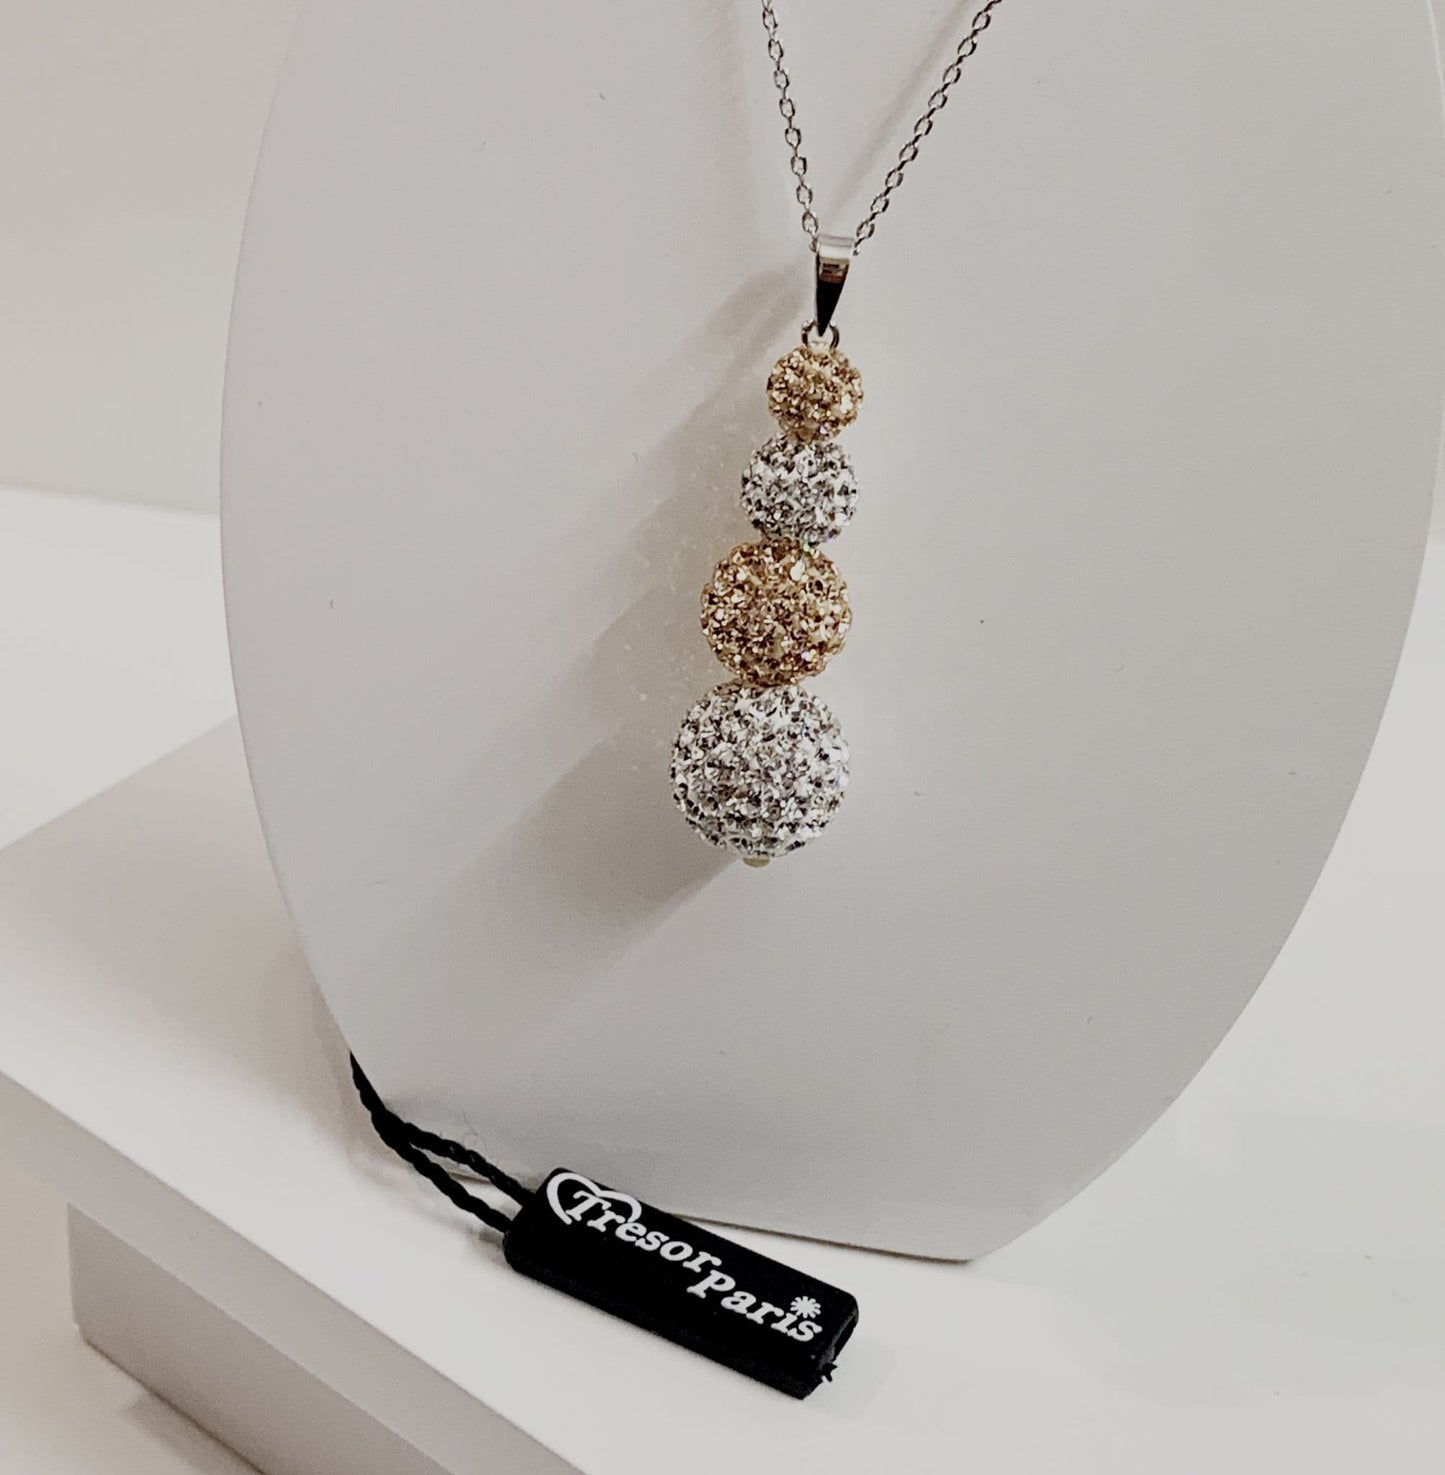 Tresor Paris White and Gold Crystal Necklace Pendant